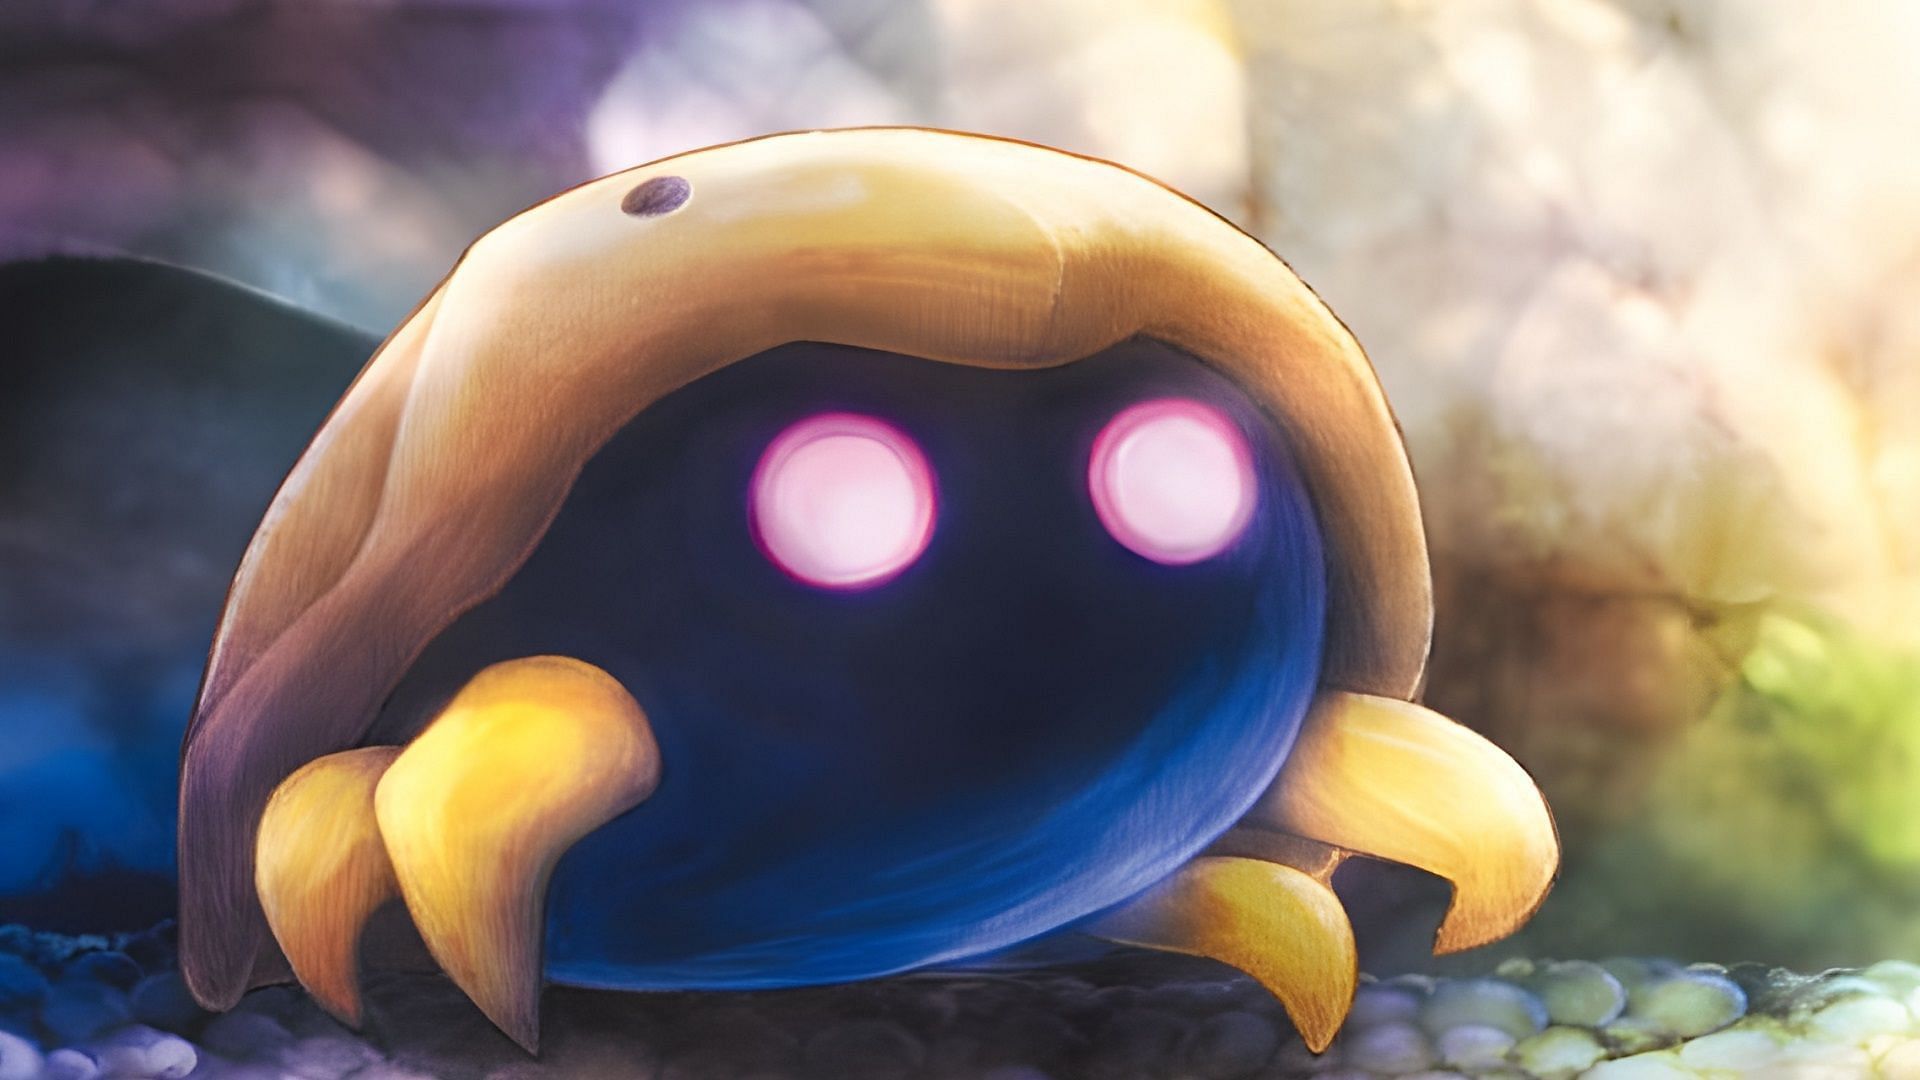 Kabuto was the Pokedle Classic answer for March 28, 2024 (Image via The Pokemon Company)